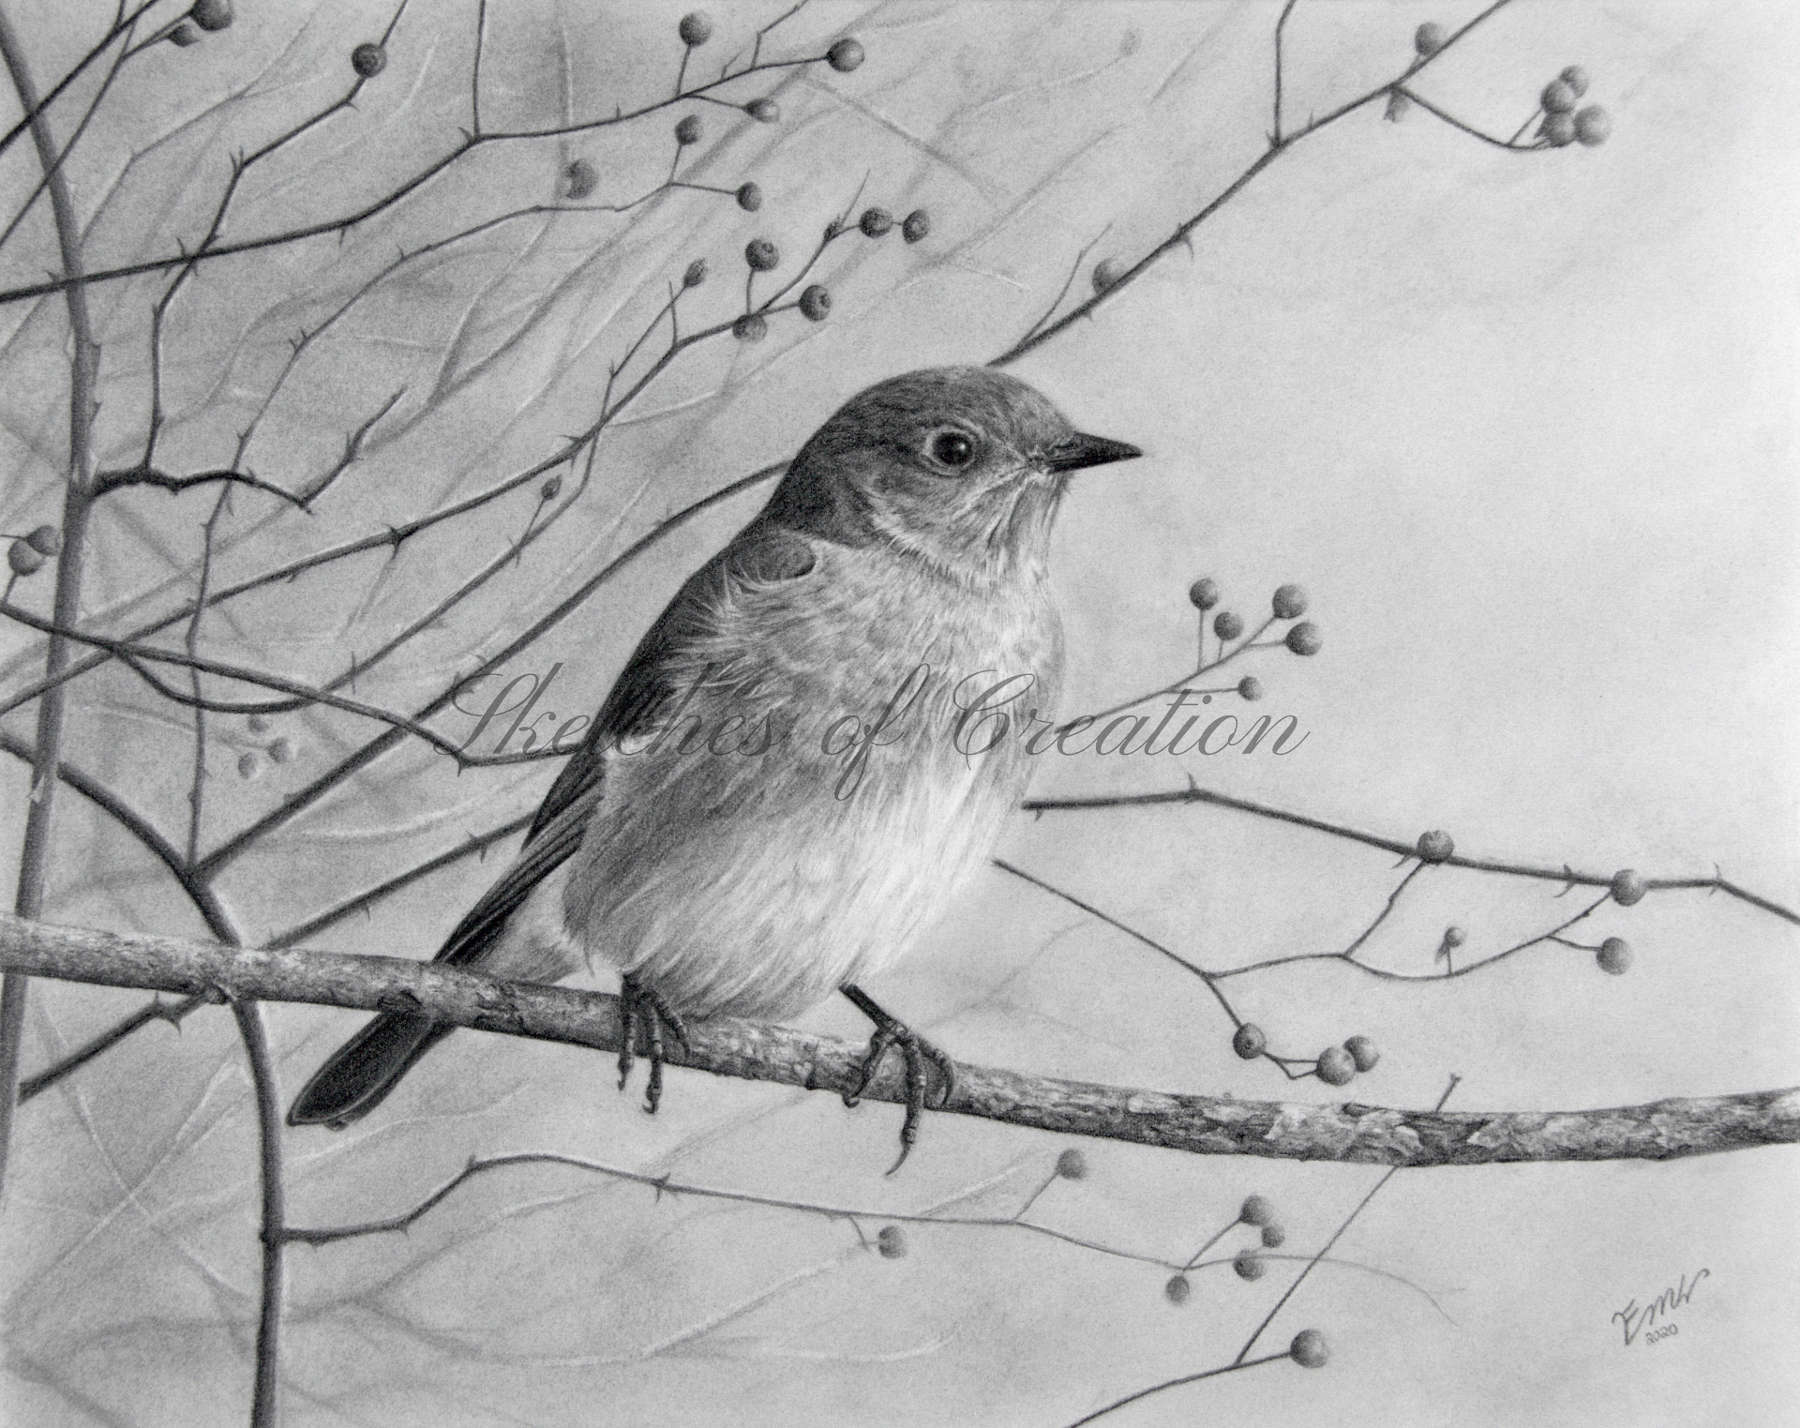 'Bluebird' a drawing of an Eastern Bluebird. 8x10 inches. Completed December 2020